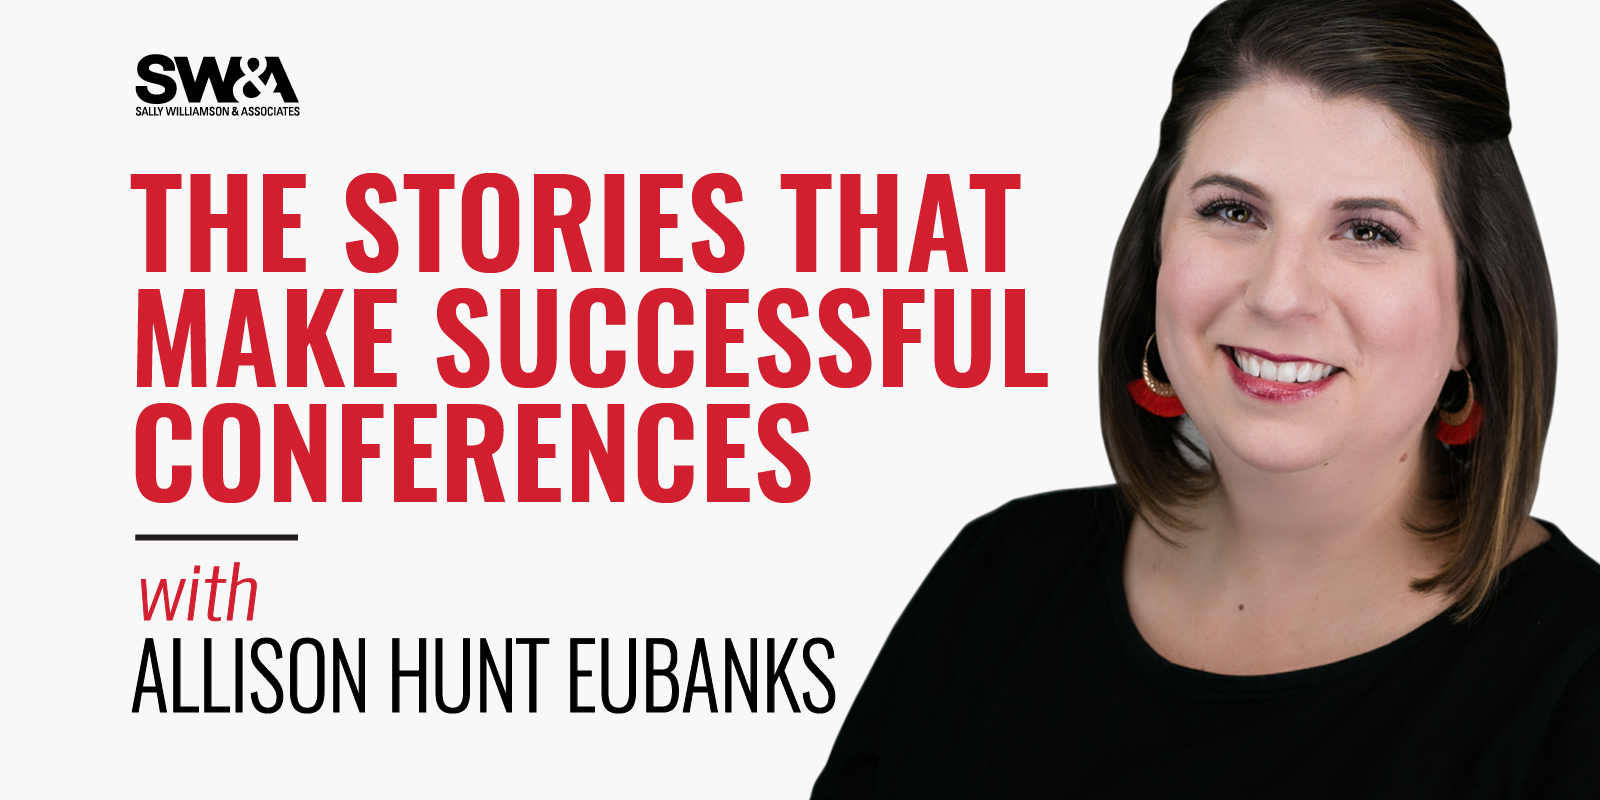 The Stories that Make Successful Conferences, with Allison Hunt Eubanks